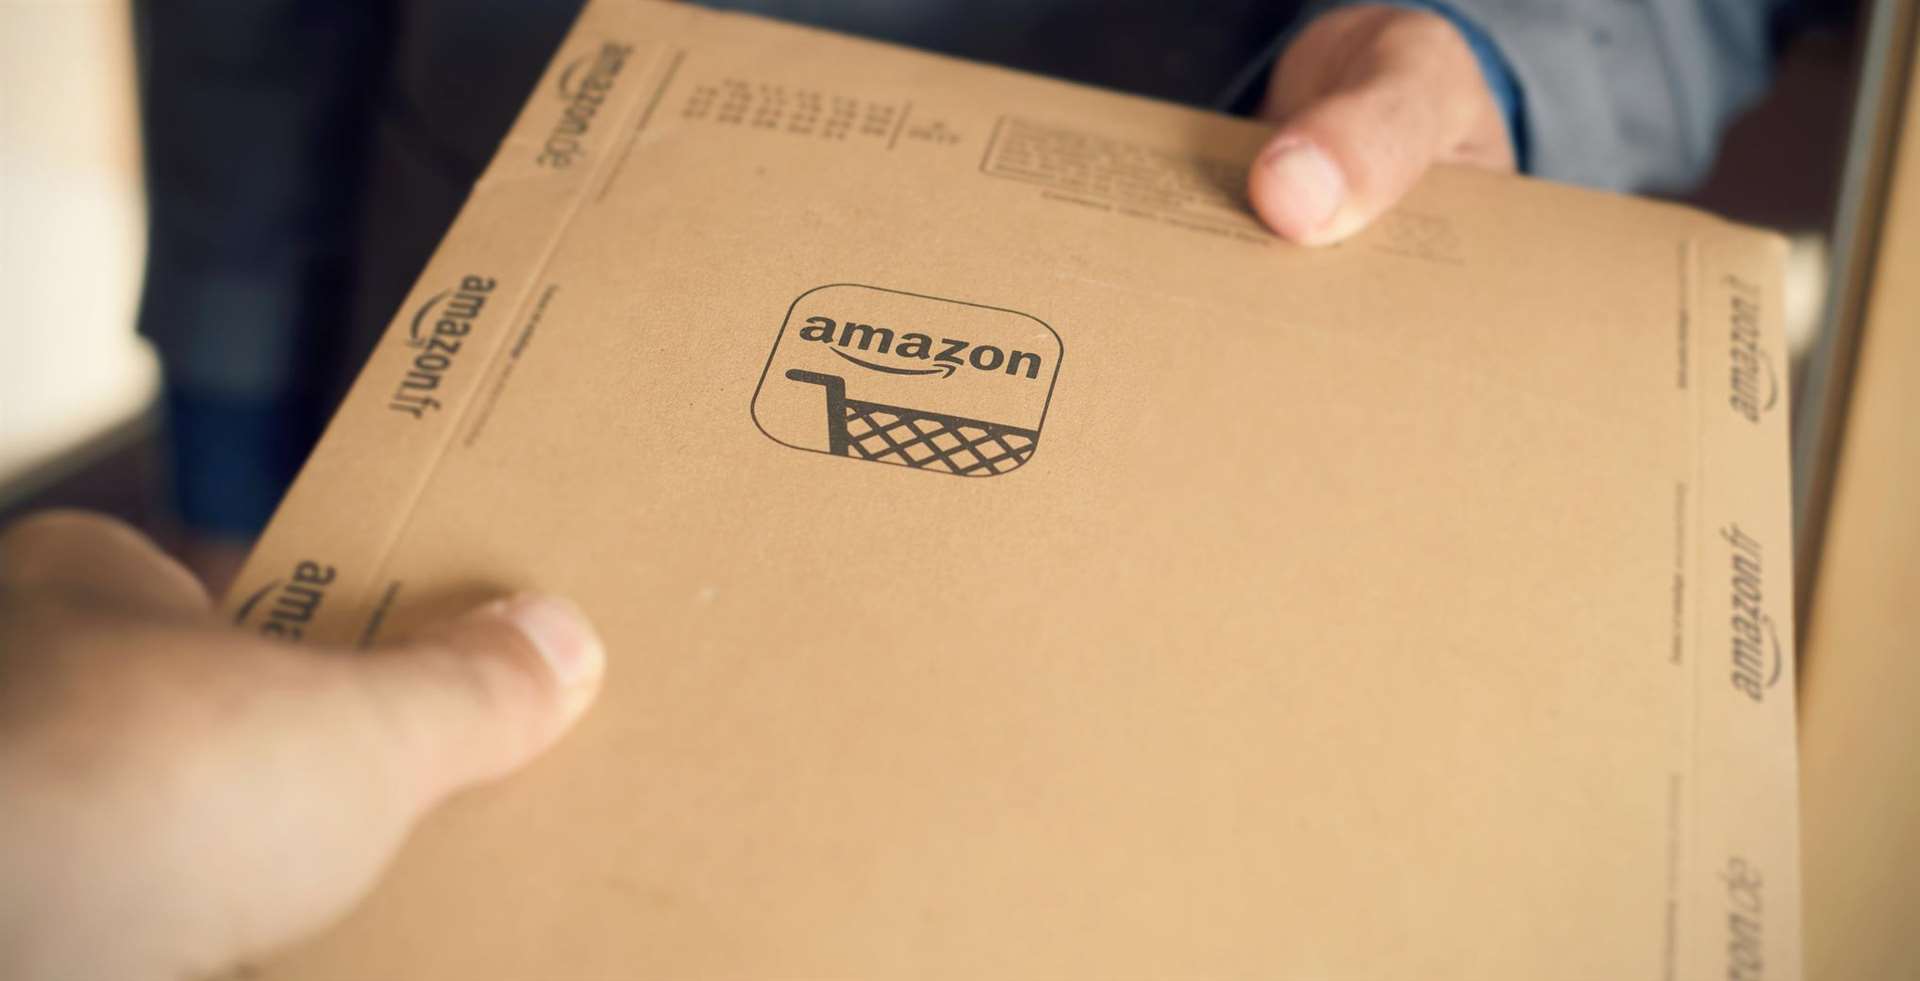 Amazon couriers have already gone into overdrive with the constant release of special deals